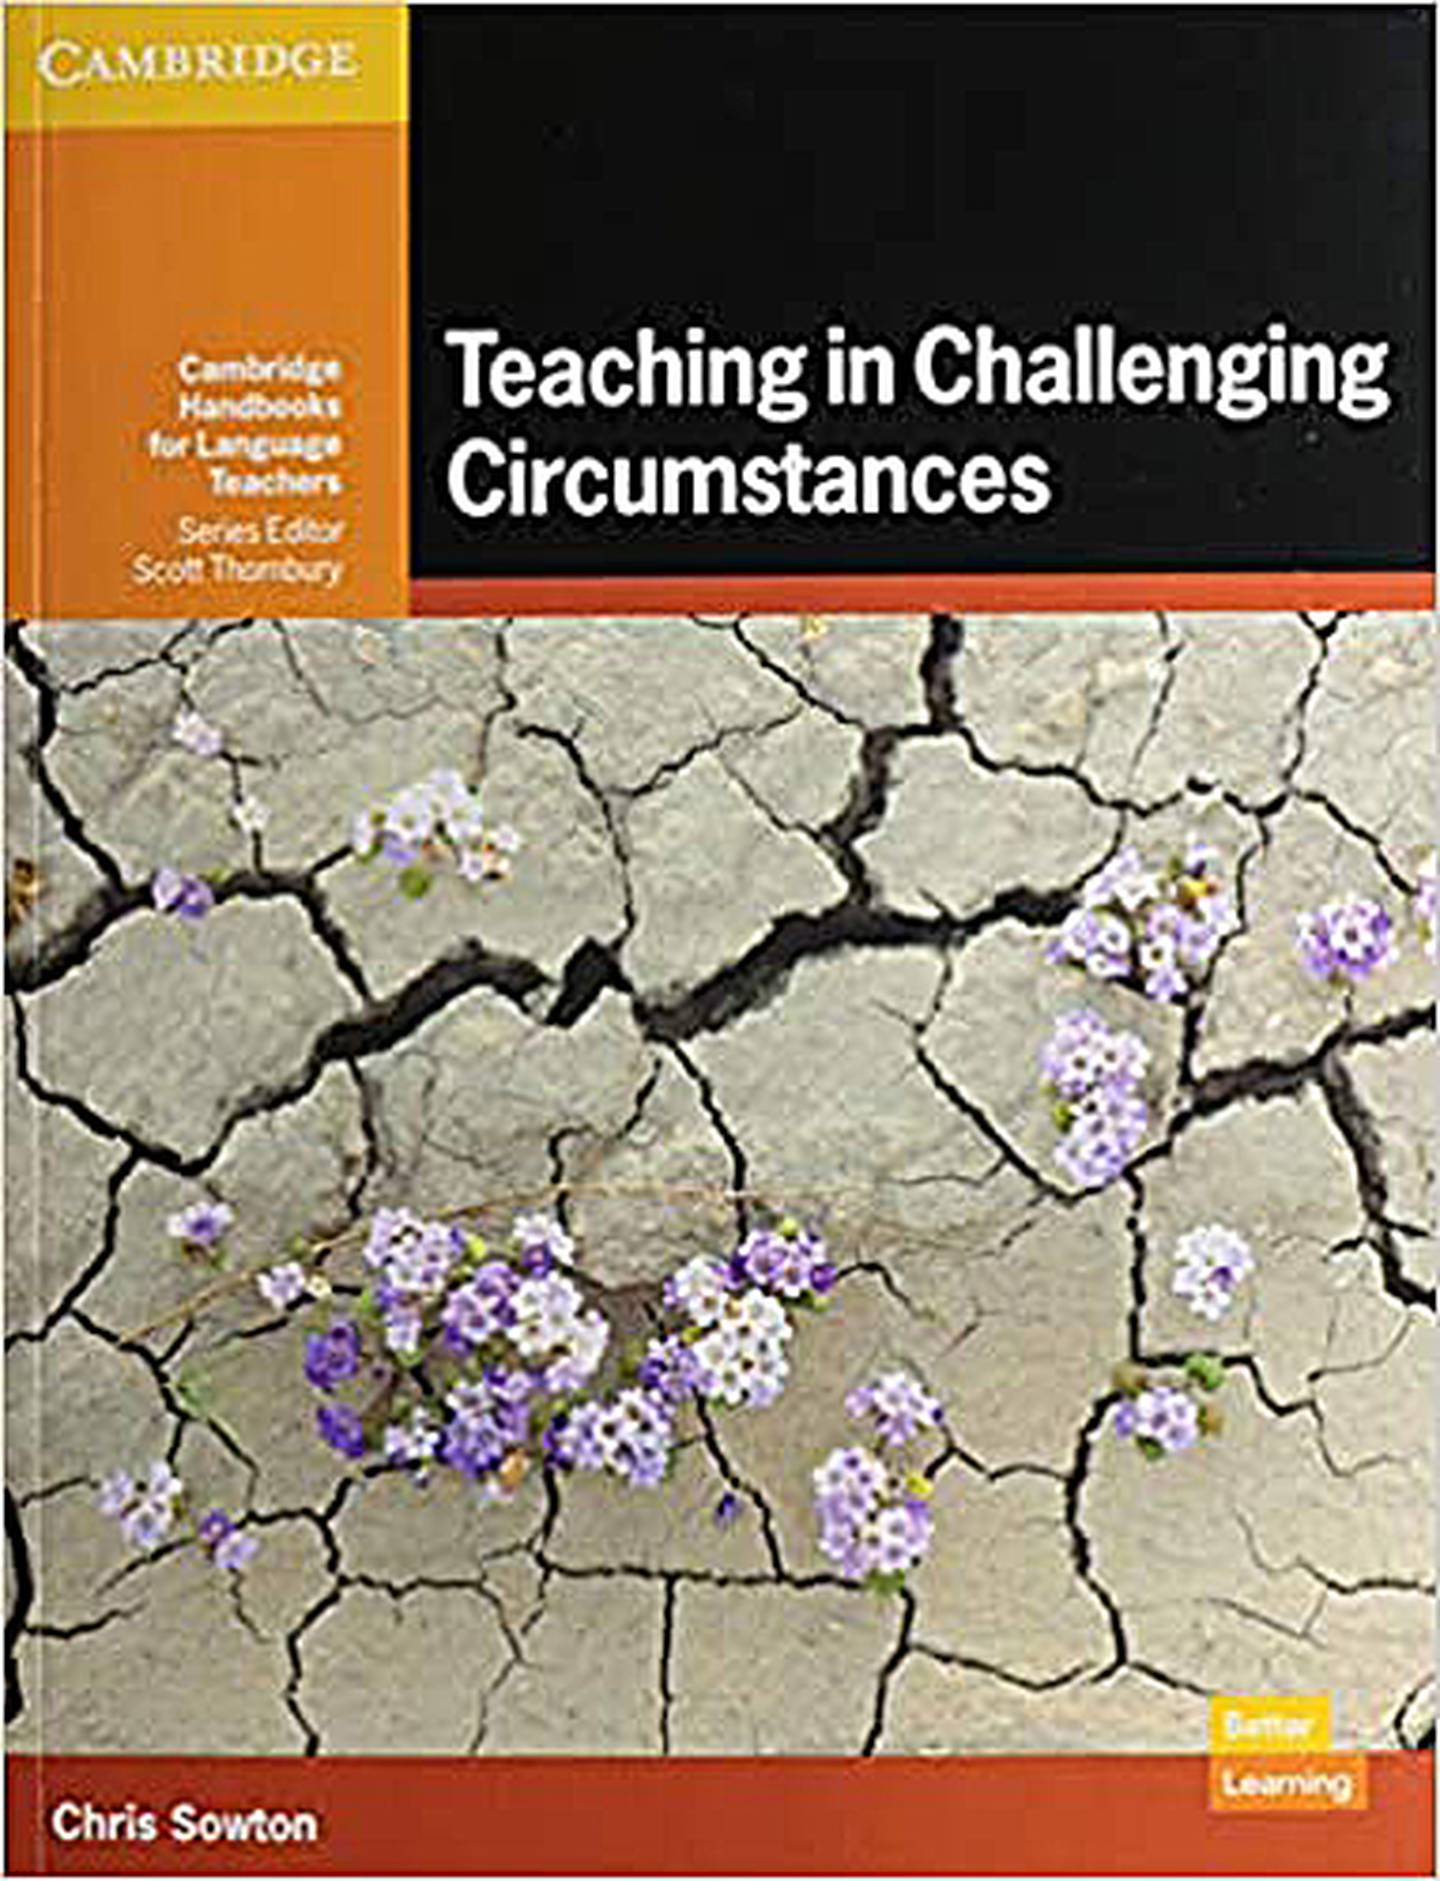 'Teaching in Challenging Circumstances' (Cambridge Handbooks for Language Teachers) has been a vital source of information for Ukrainian teachers during the current conflict